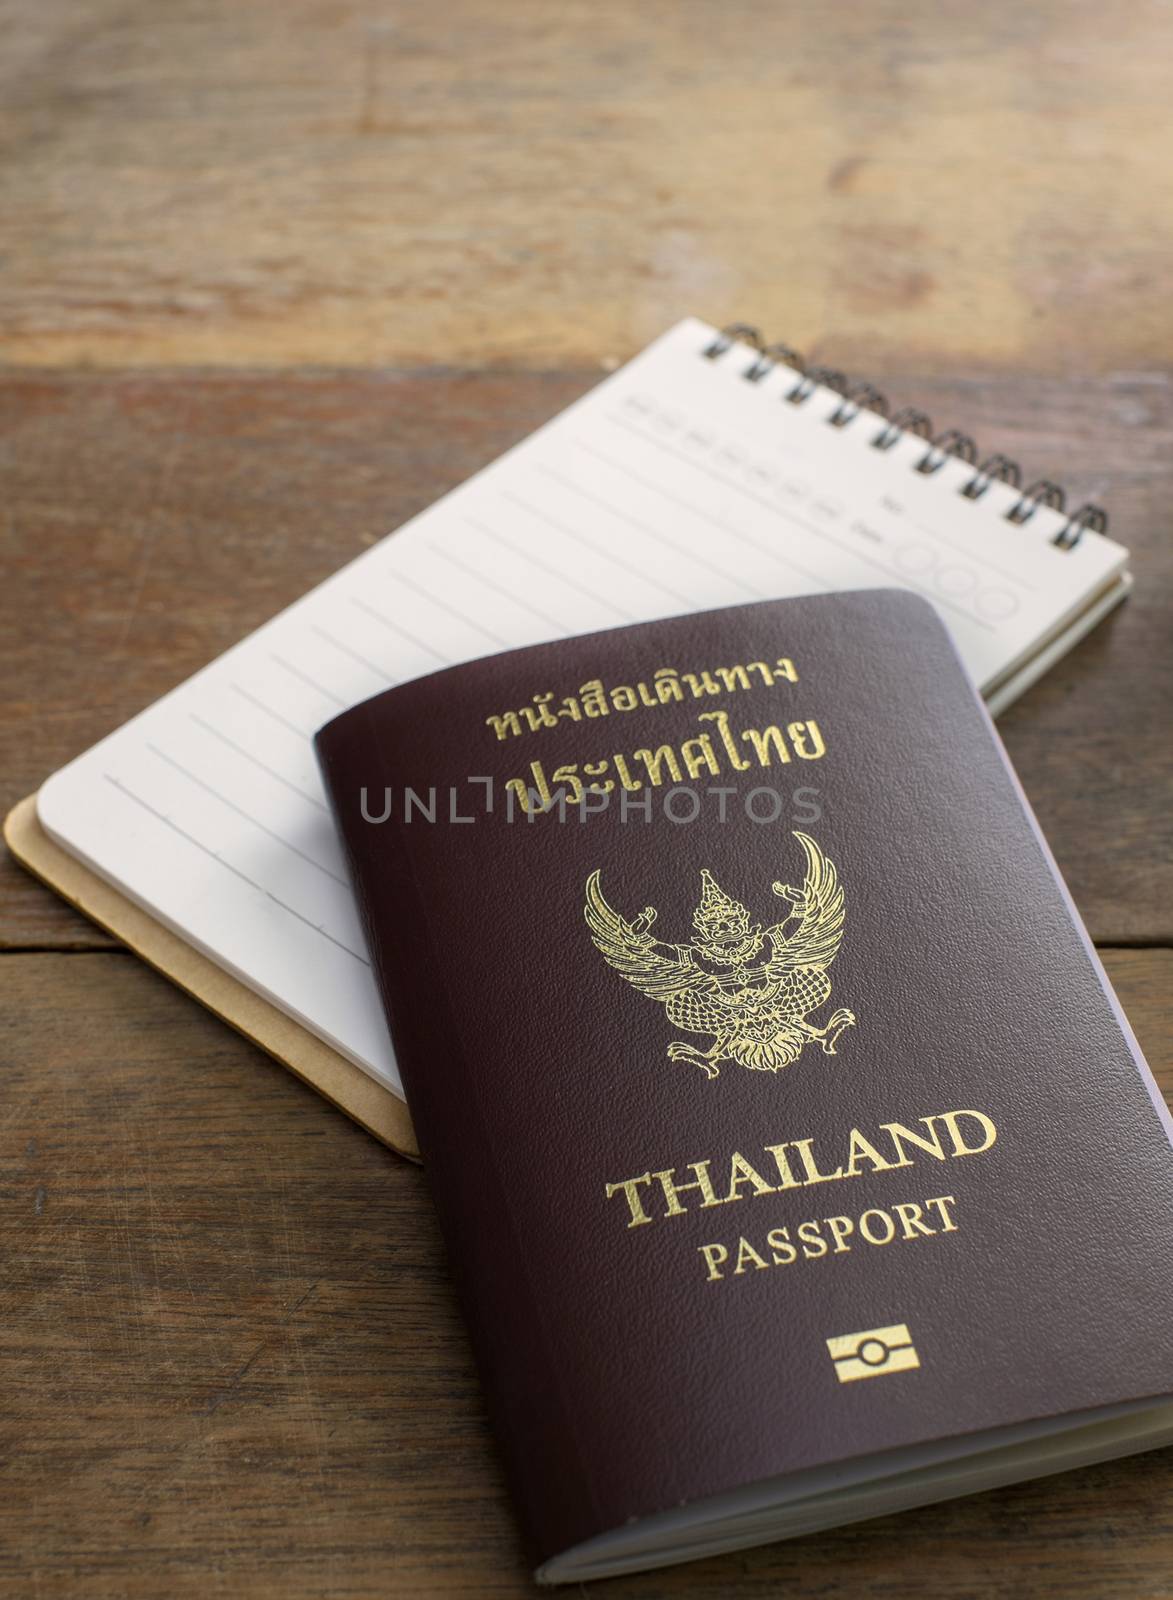 thai passport and notebook on wood table by baworn47